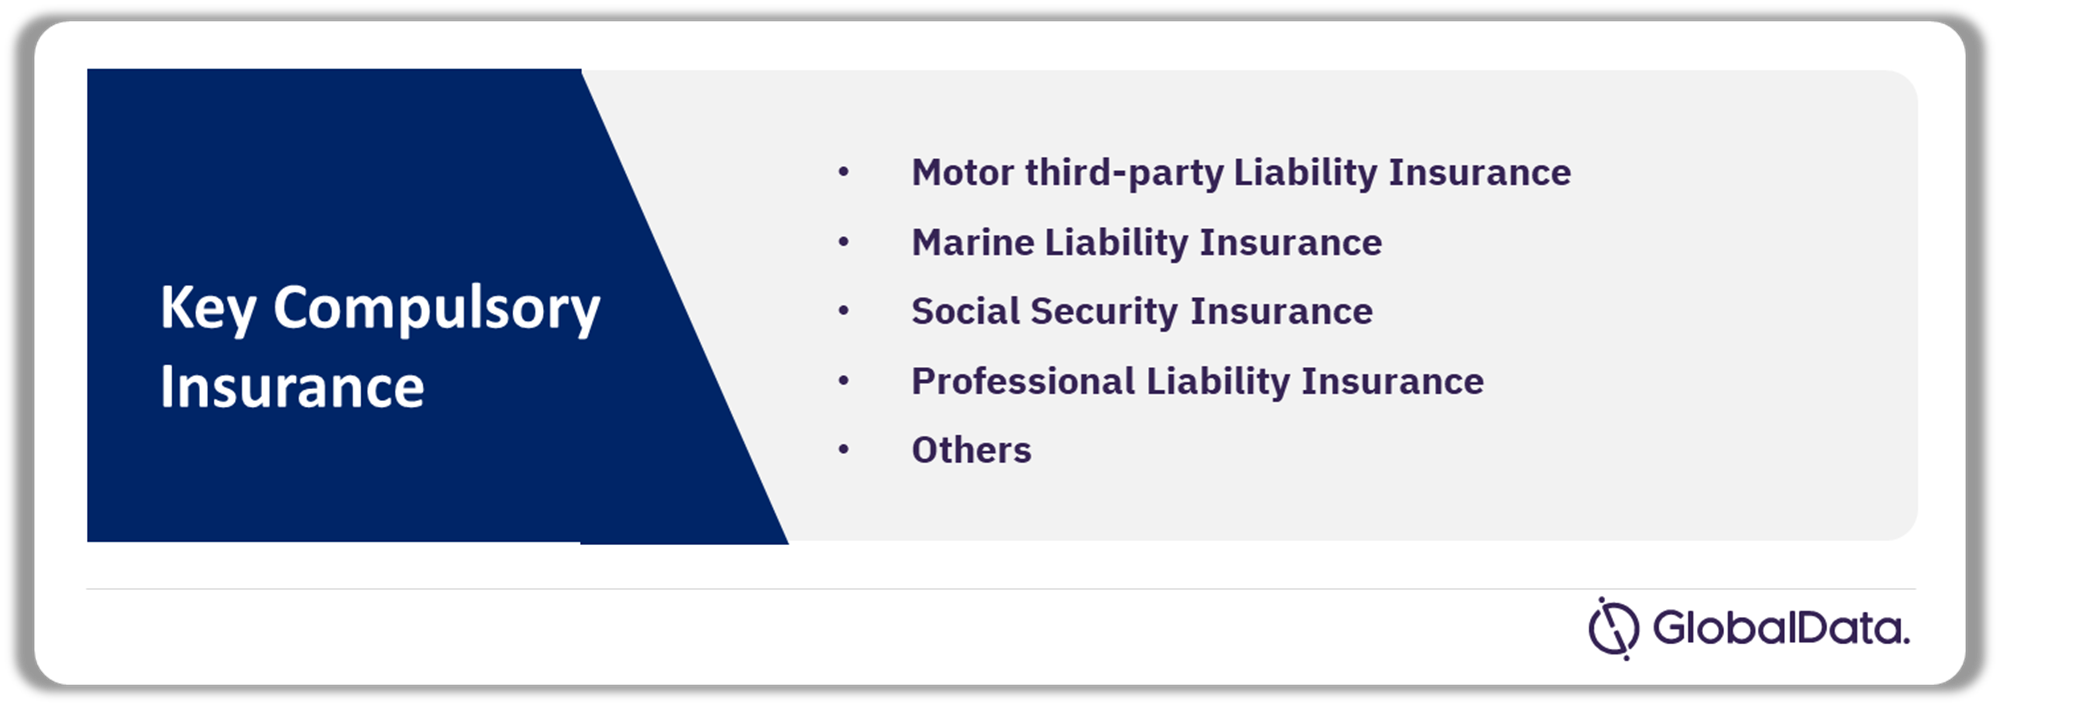 Guernsey Insurance Industry Analysis by Compulsory Insurances